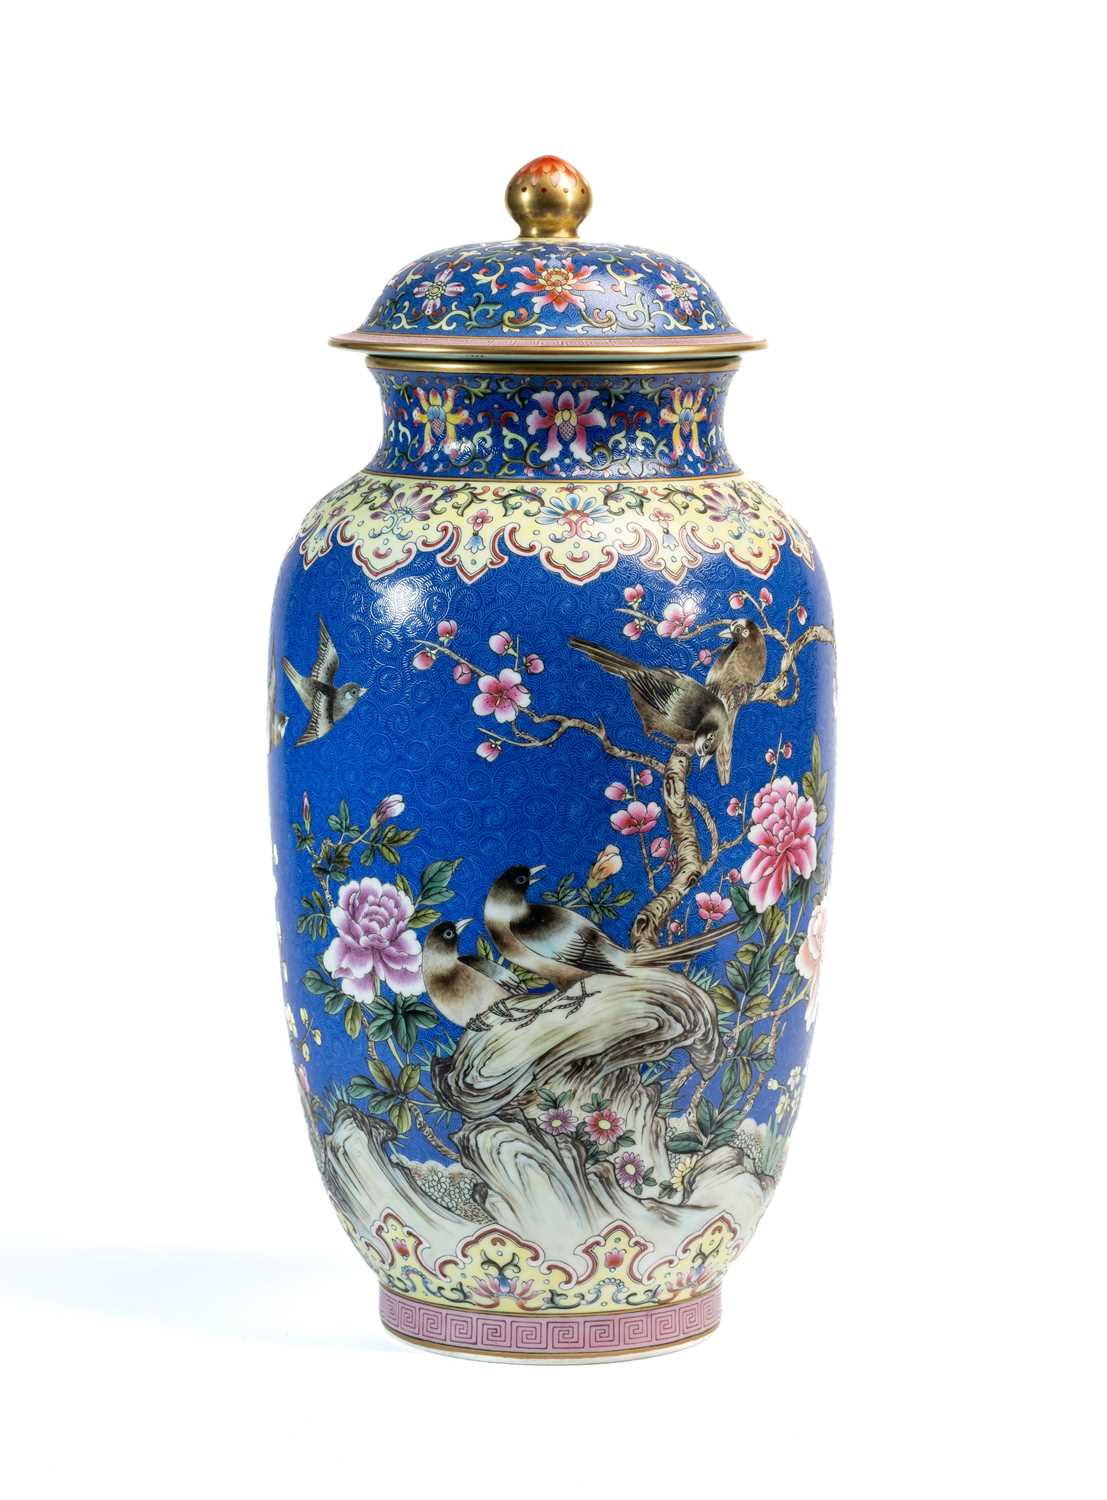 A FINELY ENAMELLED CHINESE FAMILLE-ROSE BLUE-GROUND BALUSTER VASE AND COVER, 20TH CENTURY